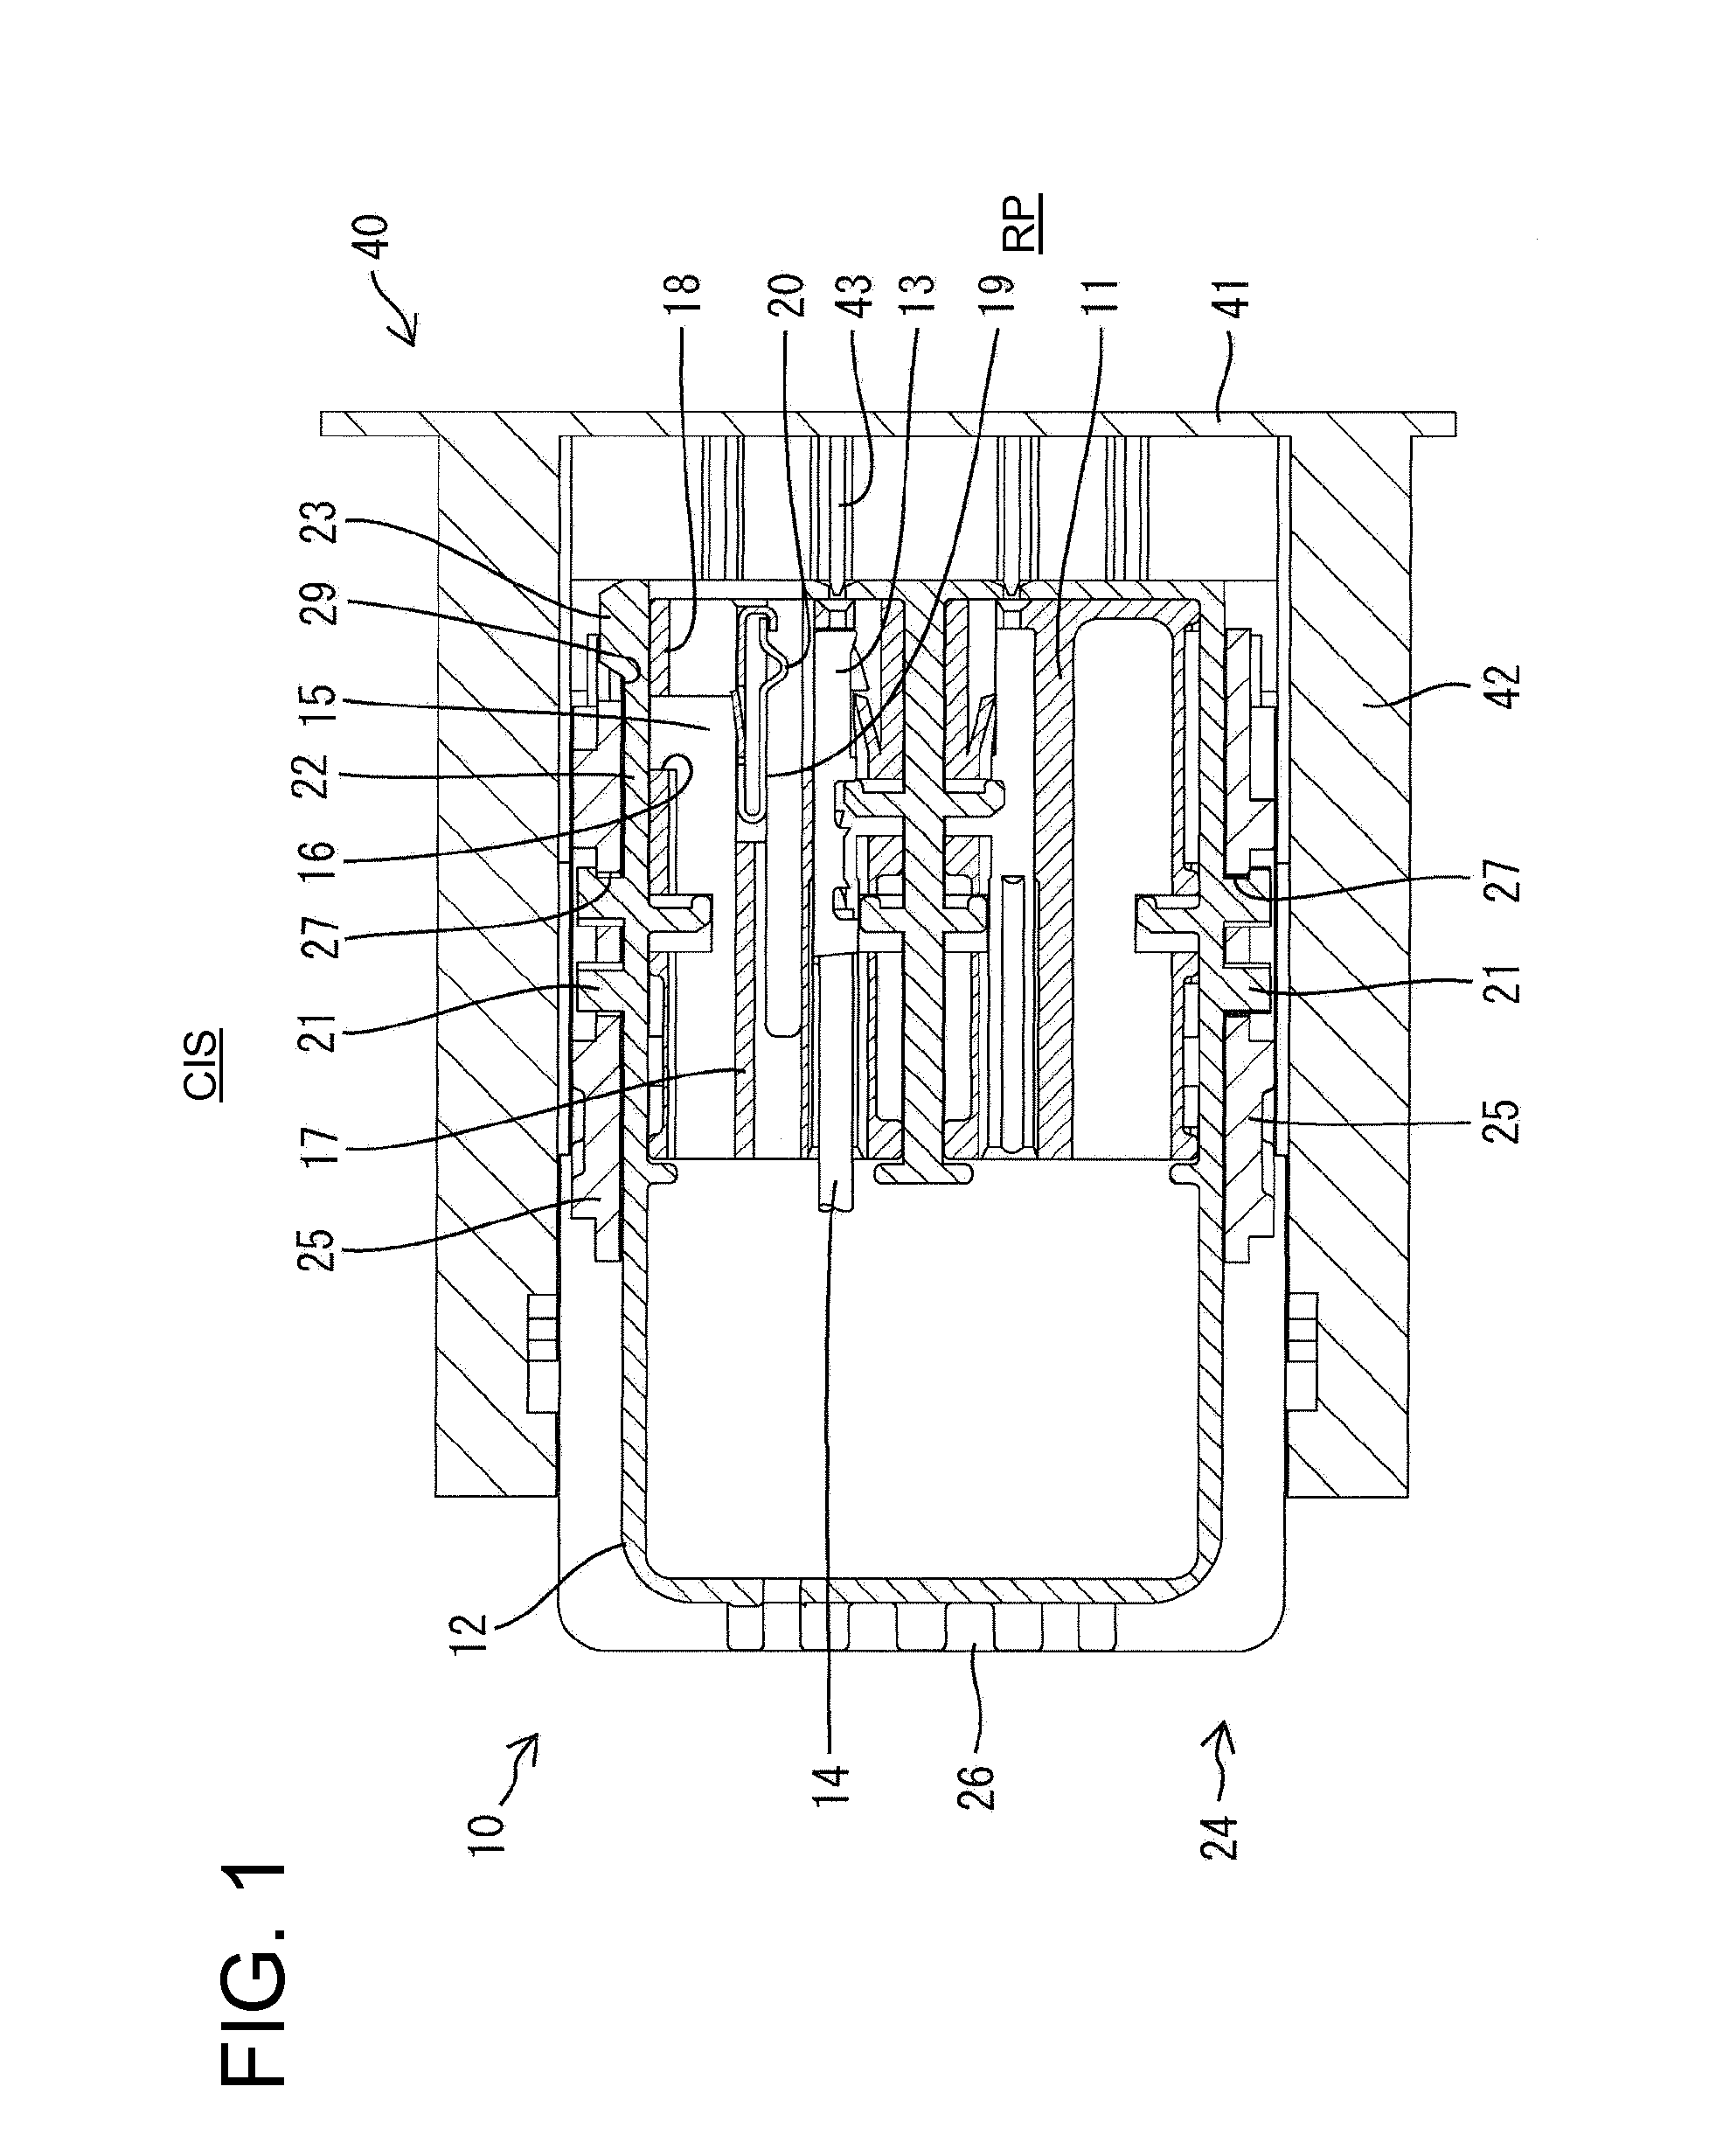 Connector with a connection detecting function